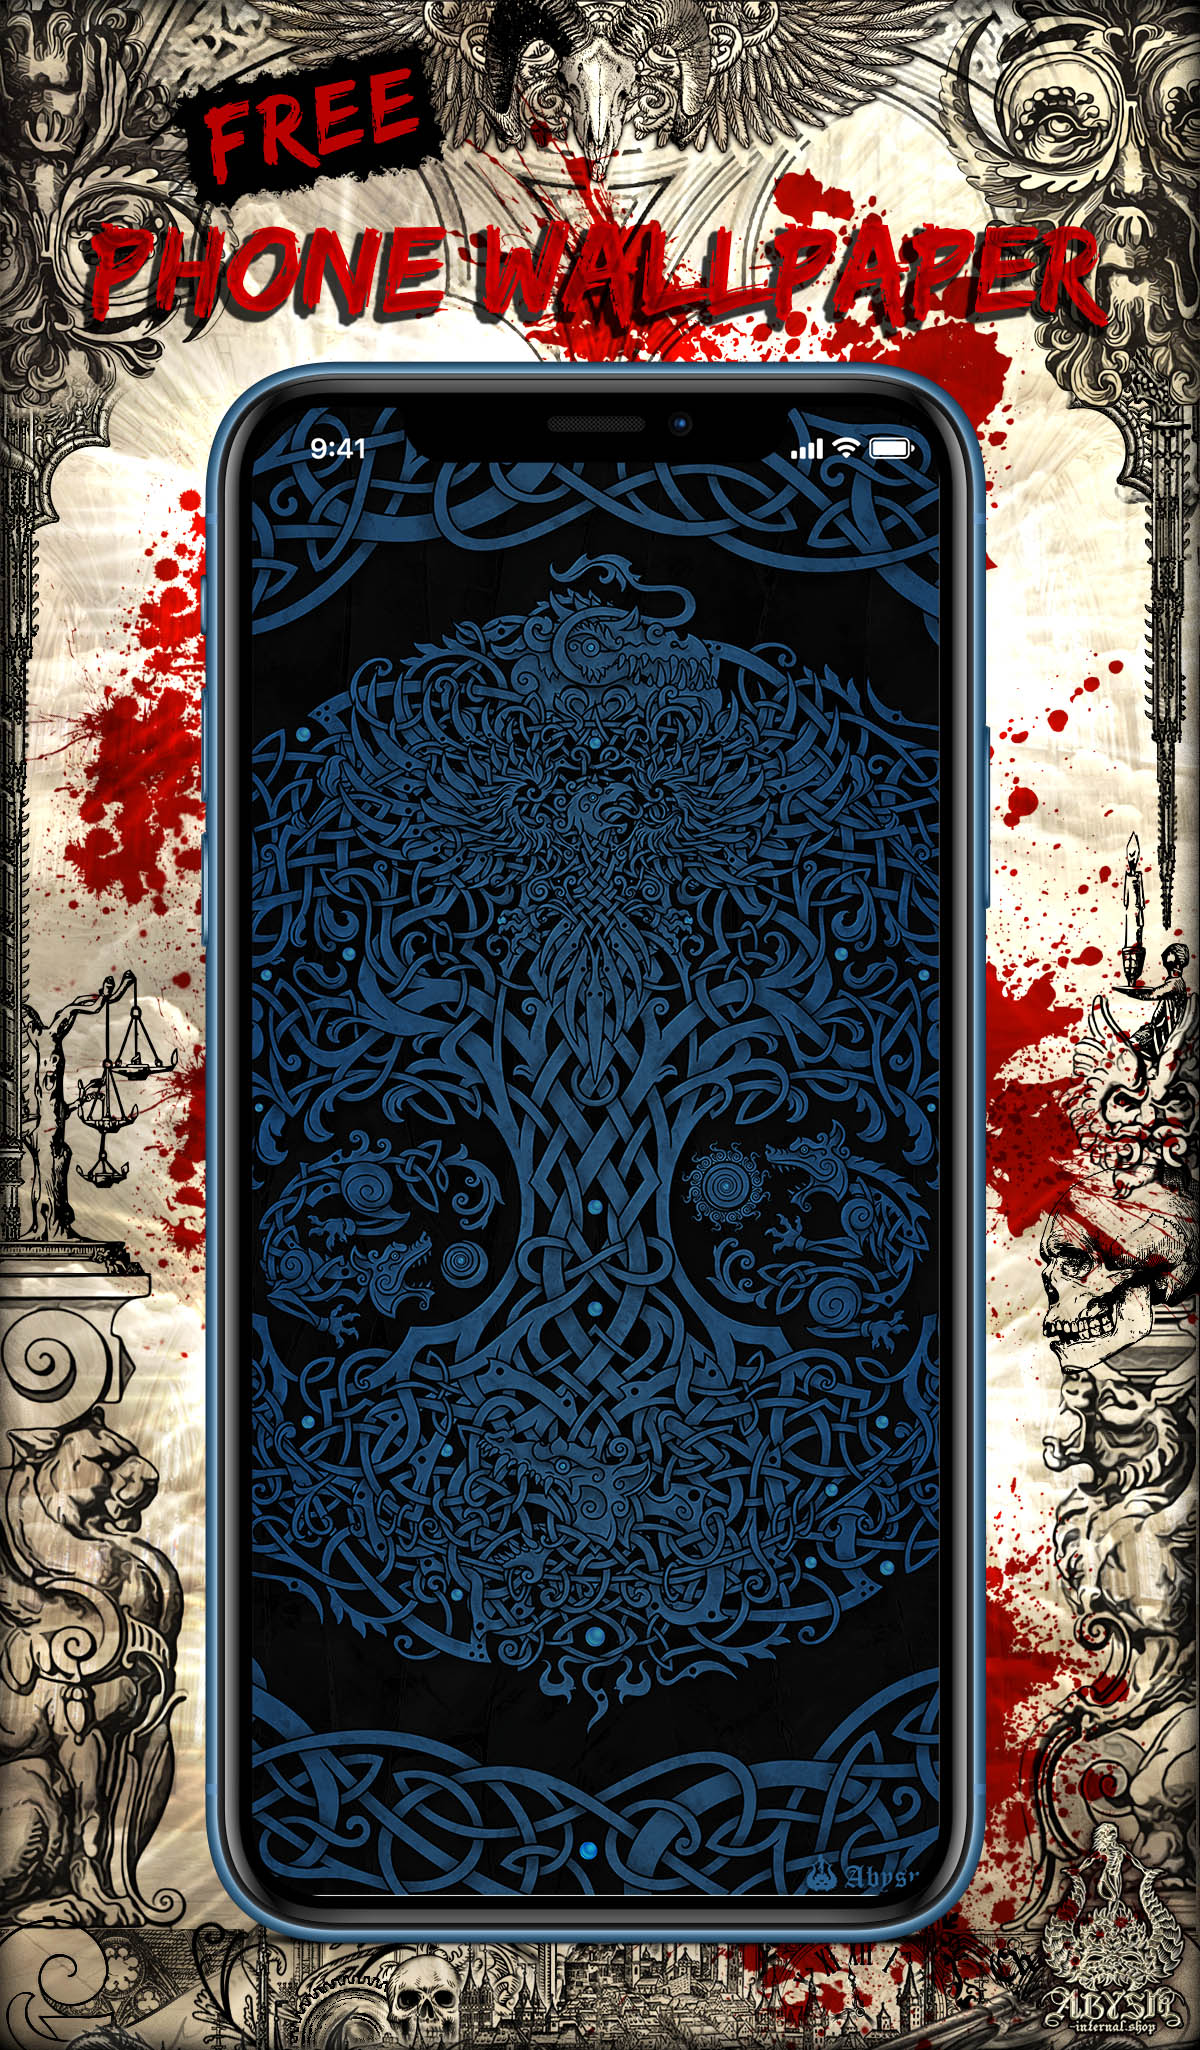 Free Wallpaper download of Viking style Tree of Life Yggdrasil, Jomundgard, Hati and Skoll, Norse Art by Abysm Internal